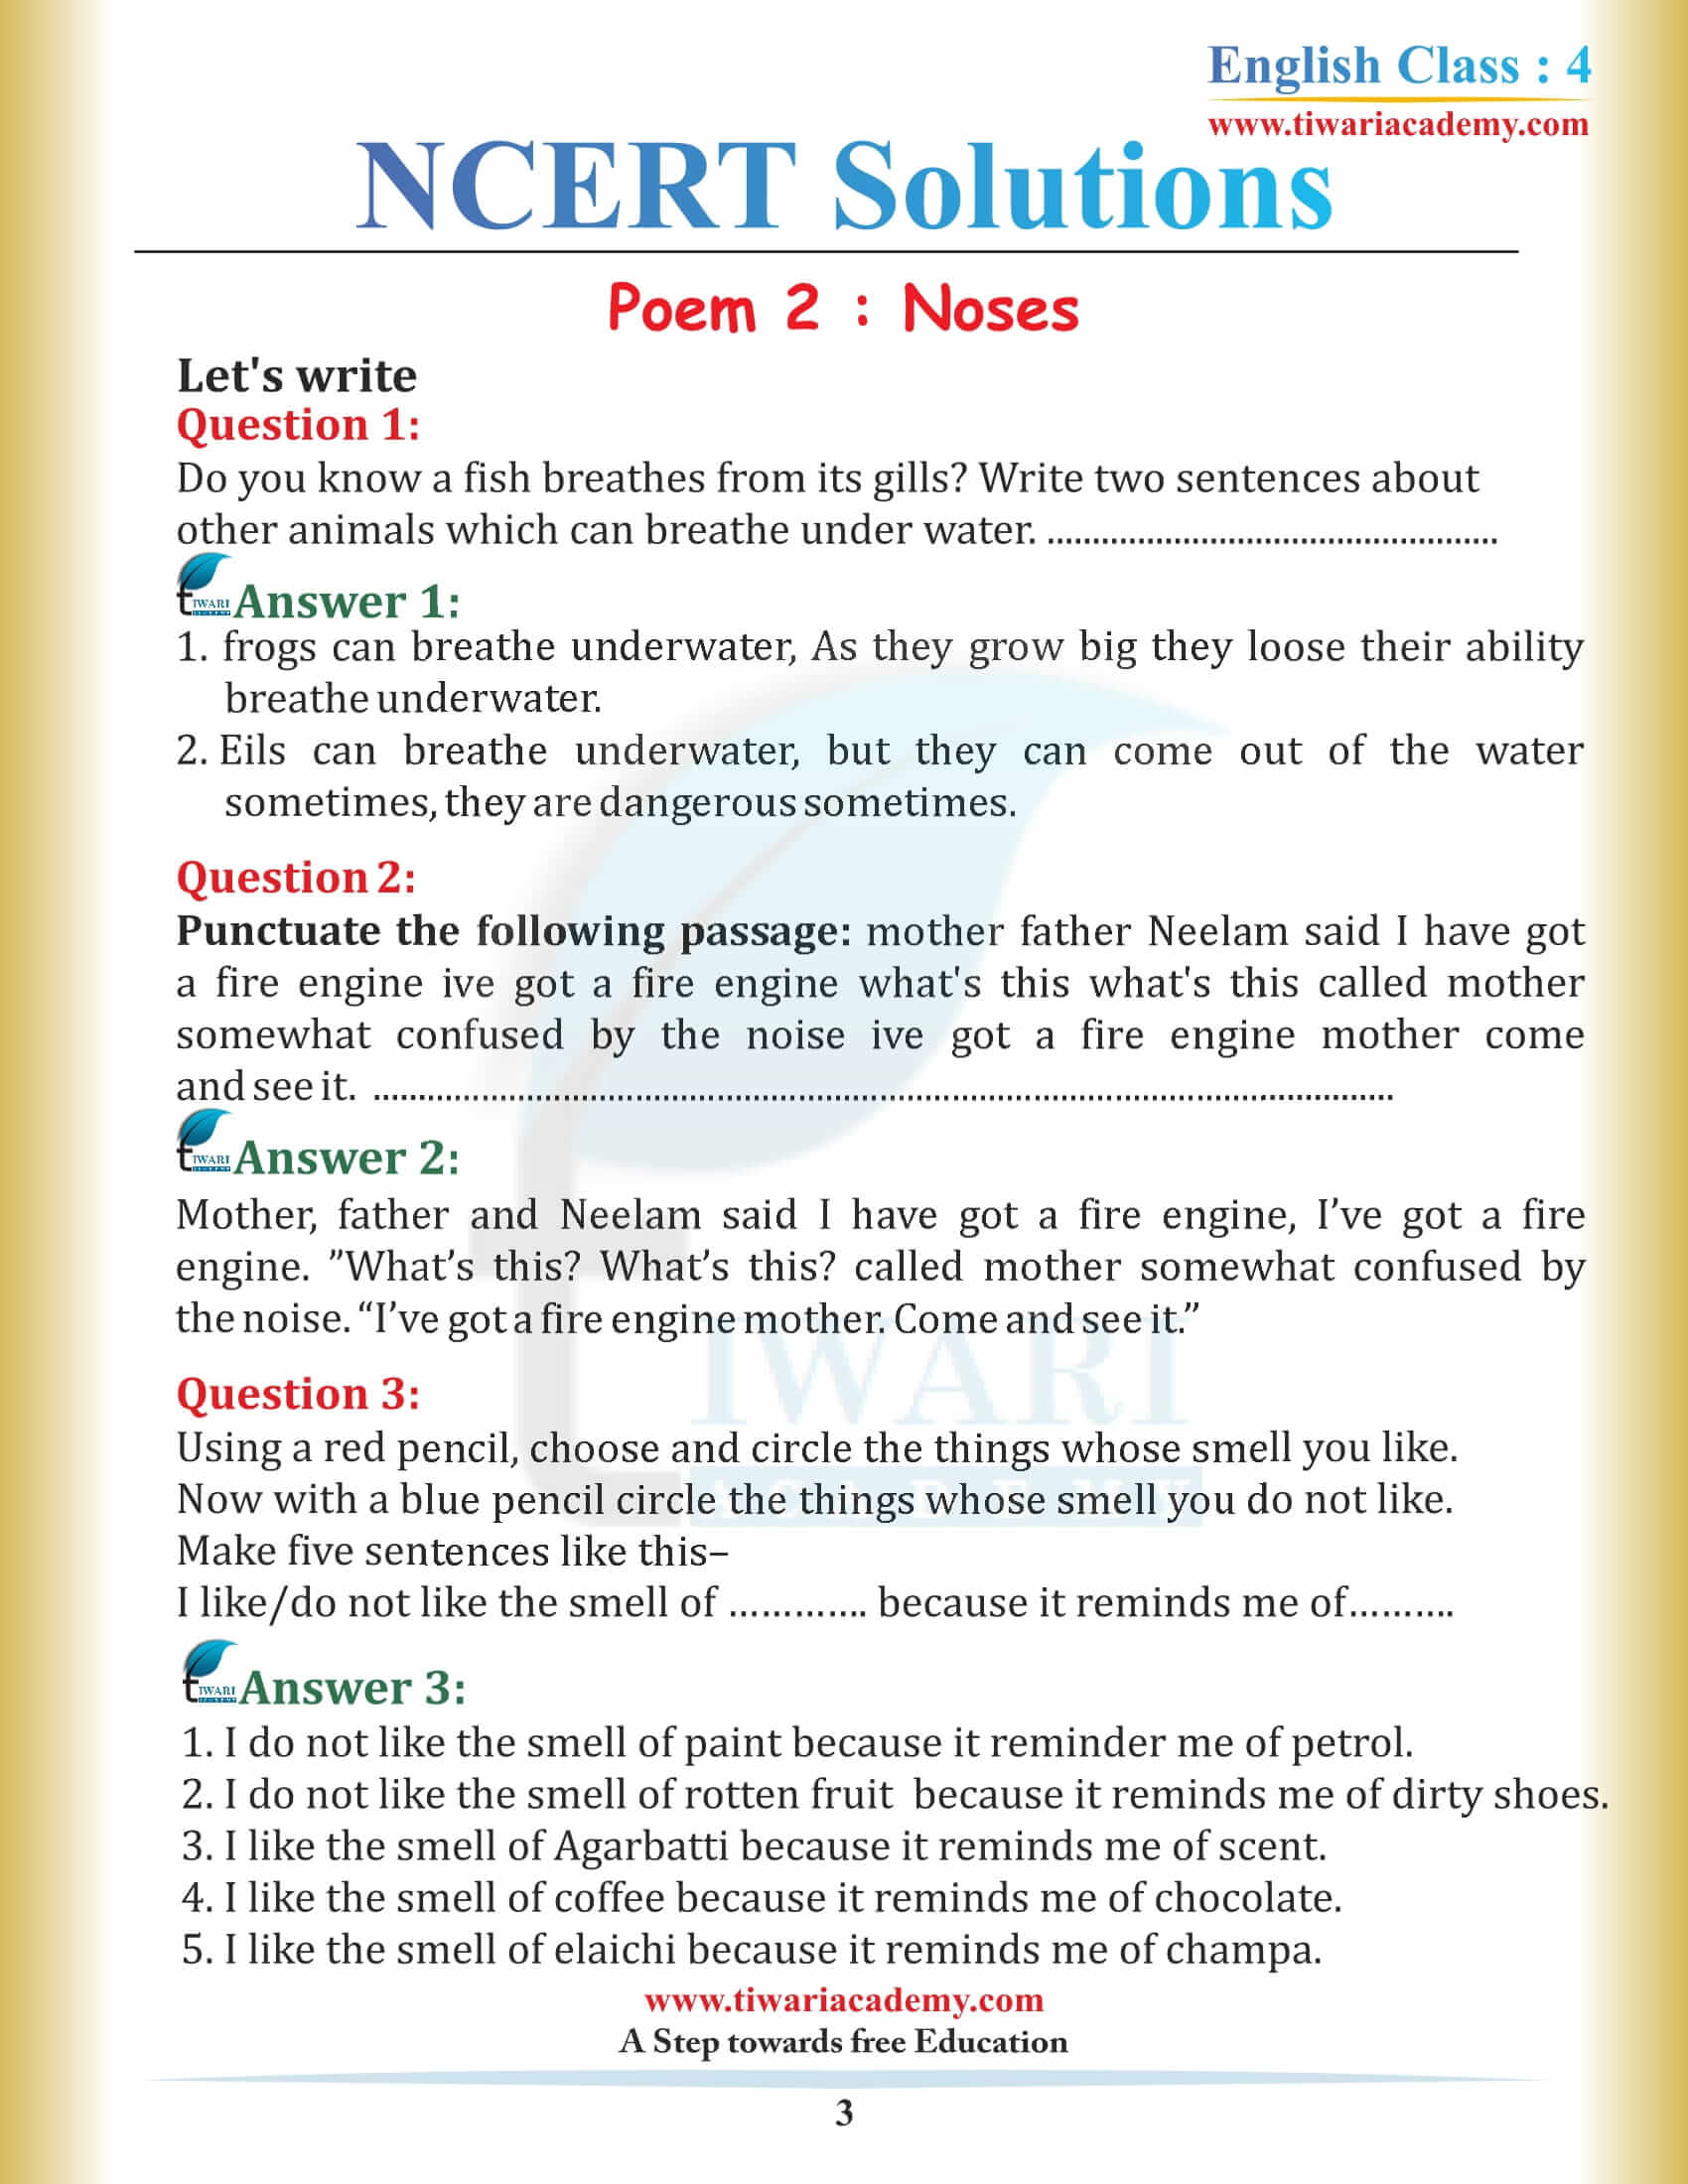 NCERT Solutions for Class 4 English Unit 2 solutions